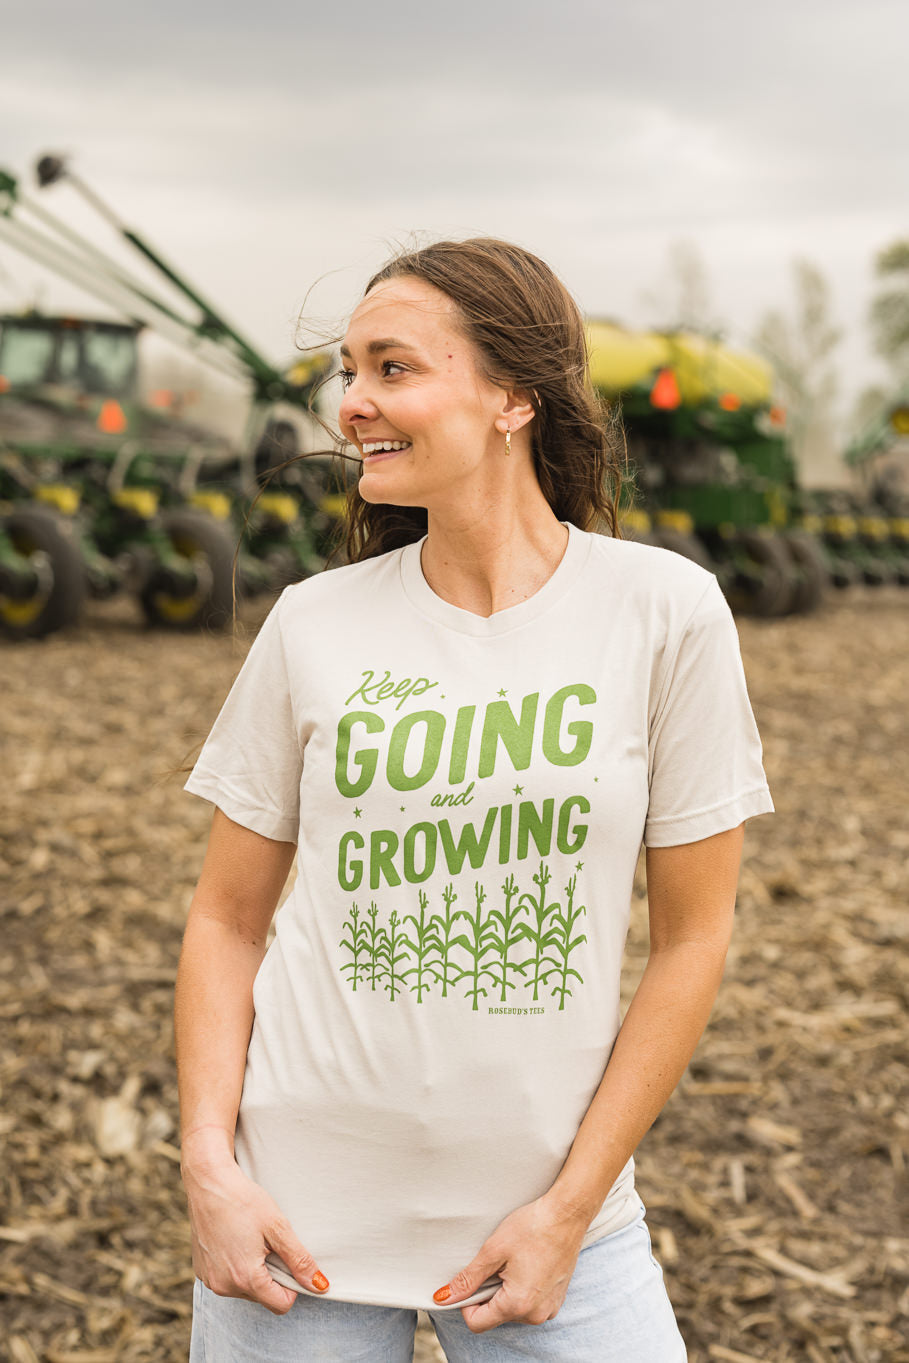 Keep Going and Growing Graphic Tee in Heather Dust | Sizes S - 3XL - Rosebud's Tees